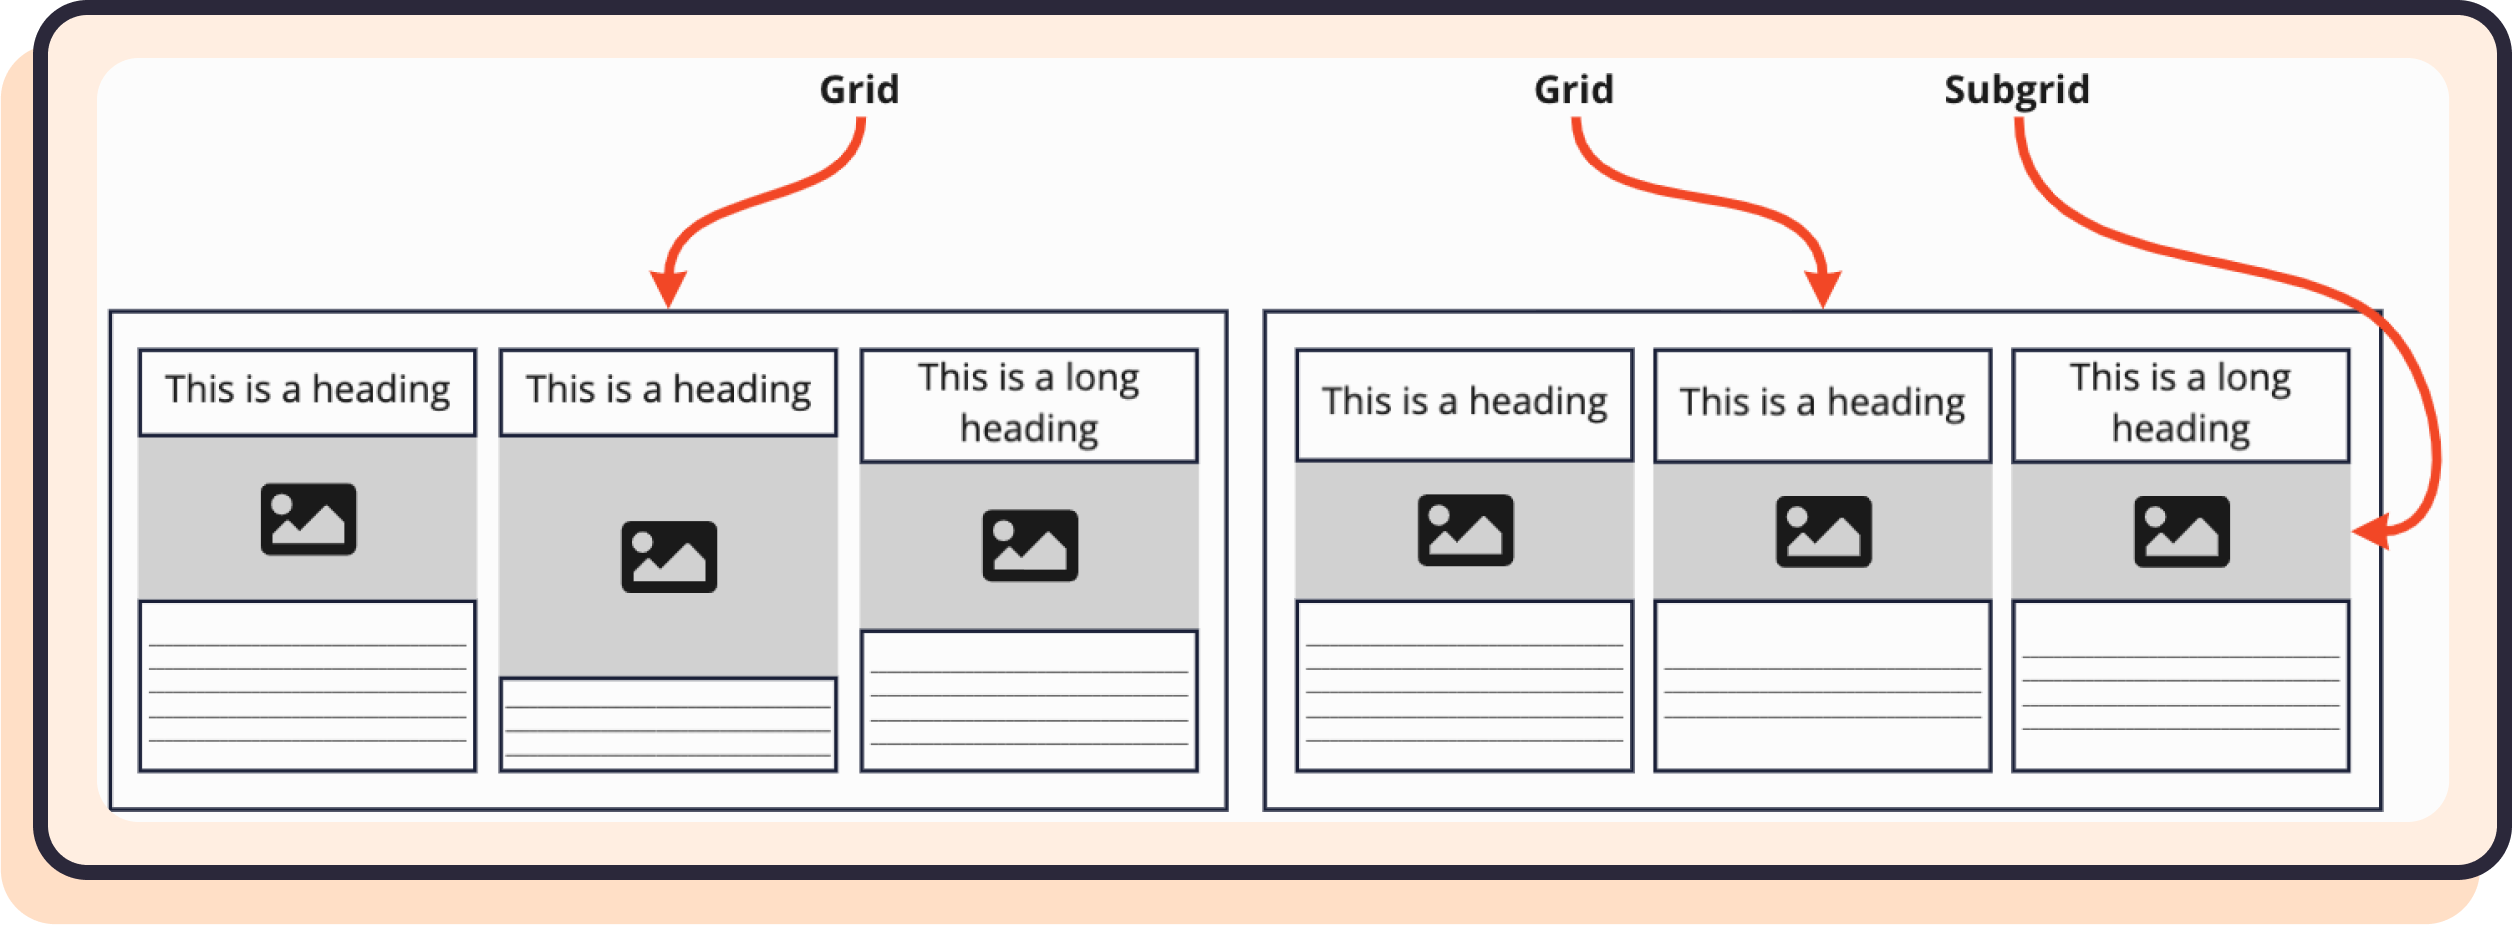 2 grids, each with 3 columns containing cards. The first grid's cards content sections are misaligned while the second grid's cards are correctly aligned thanks to subgrid. 